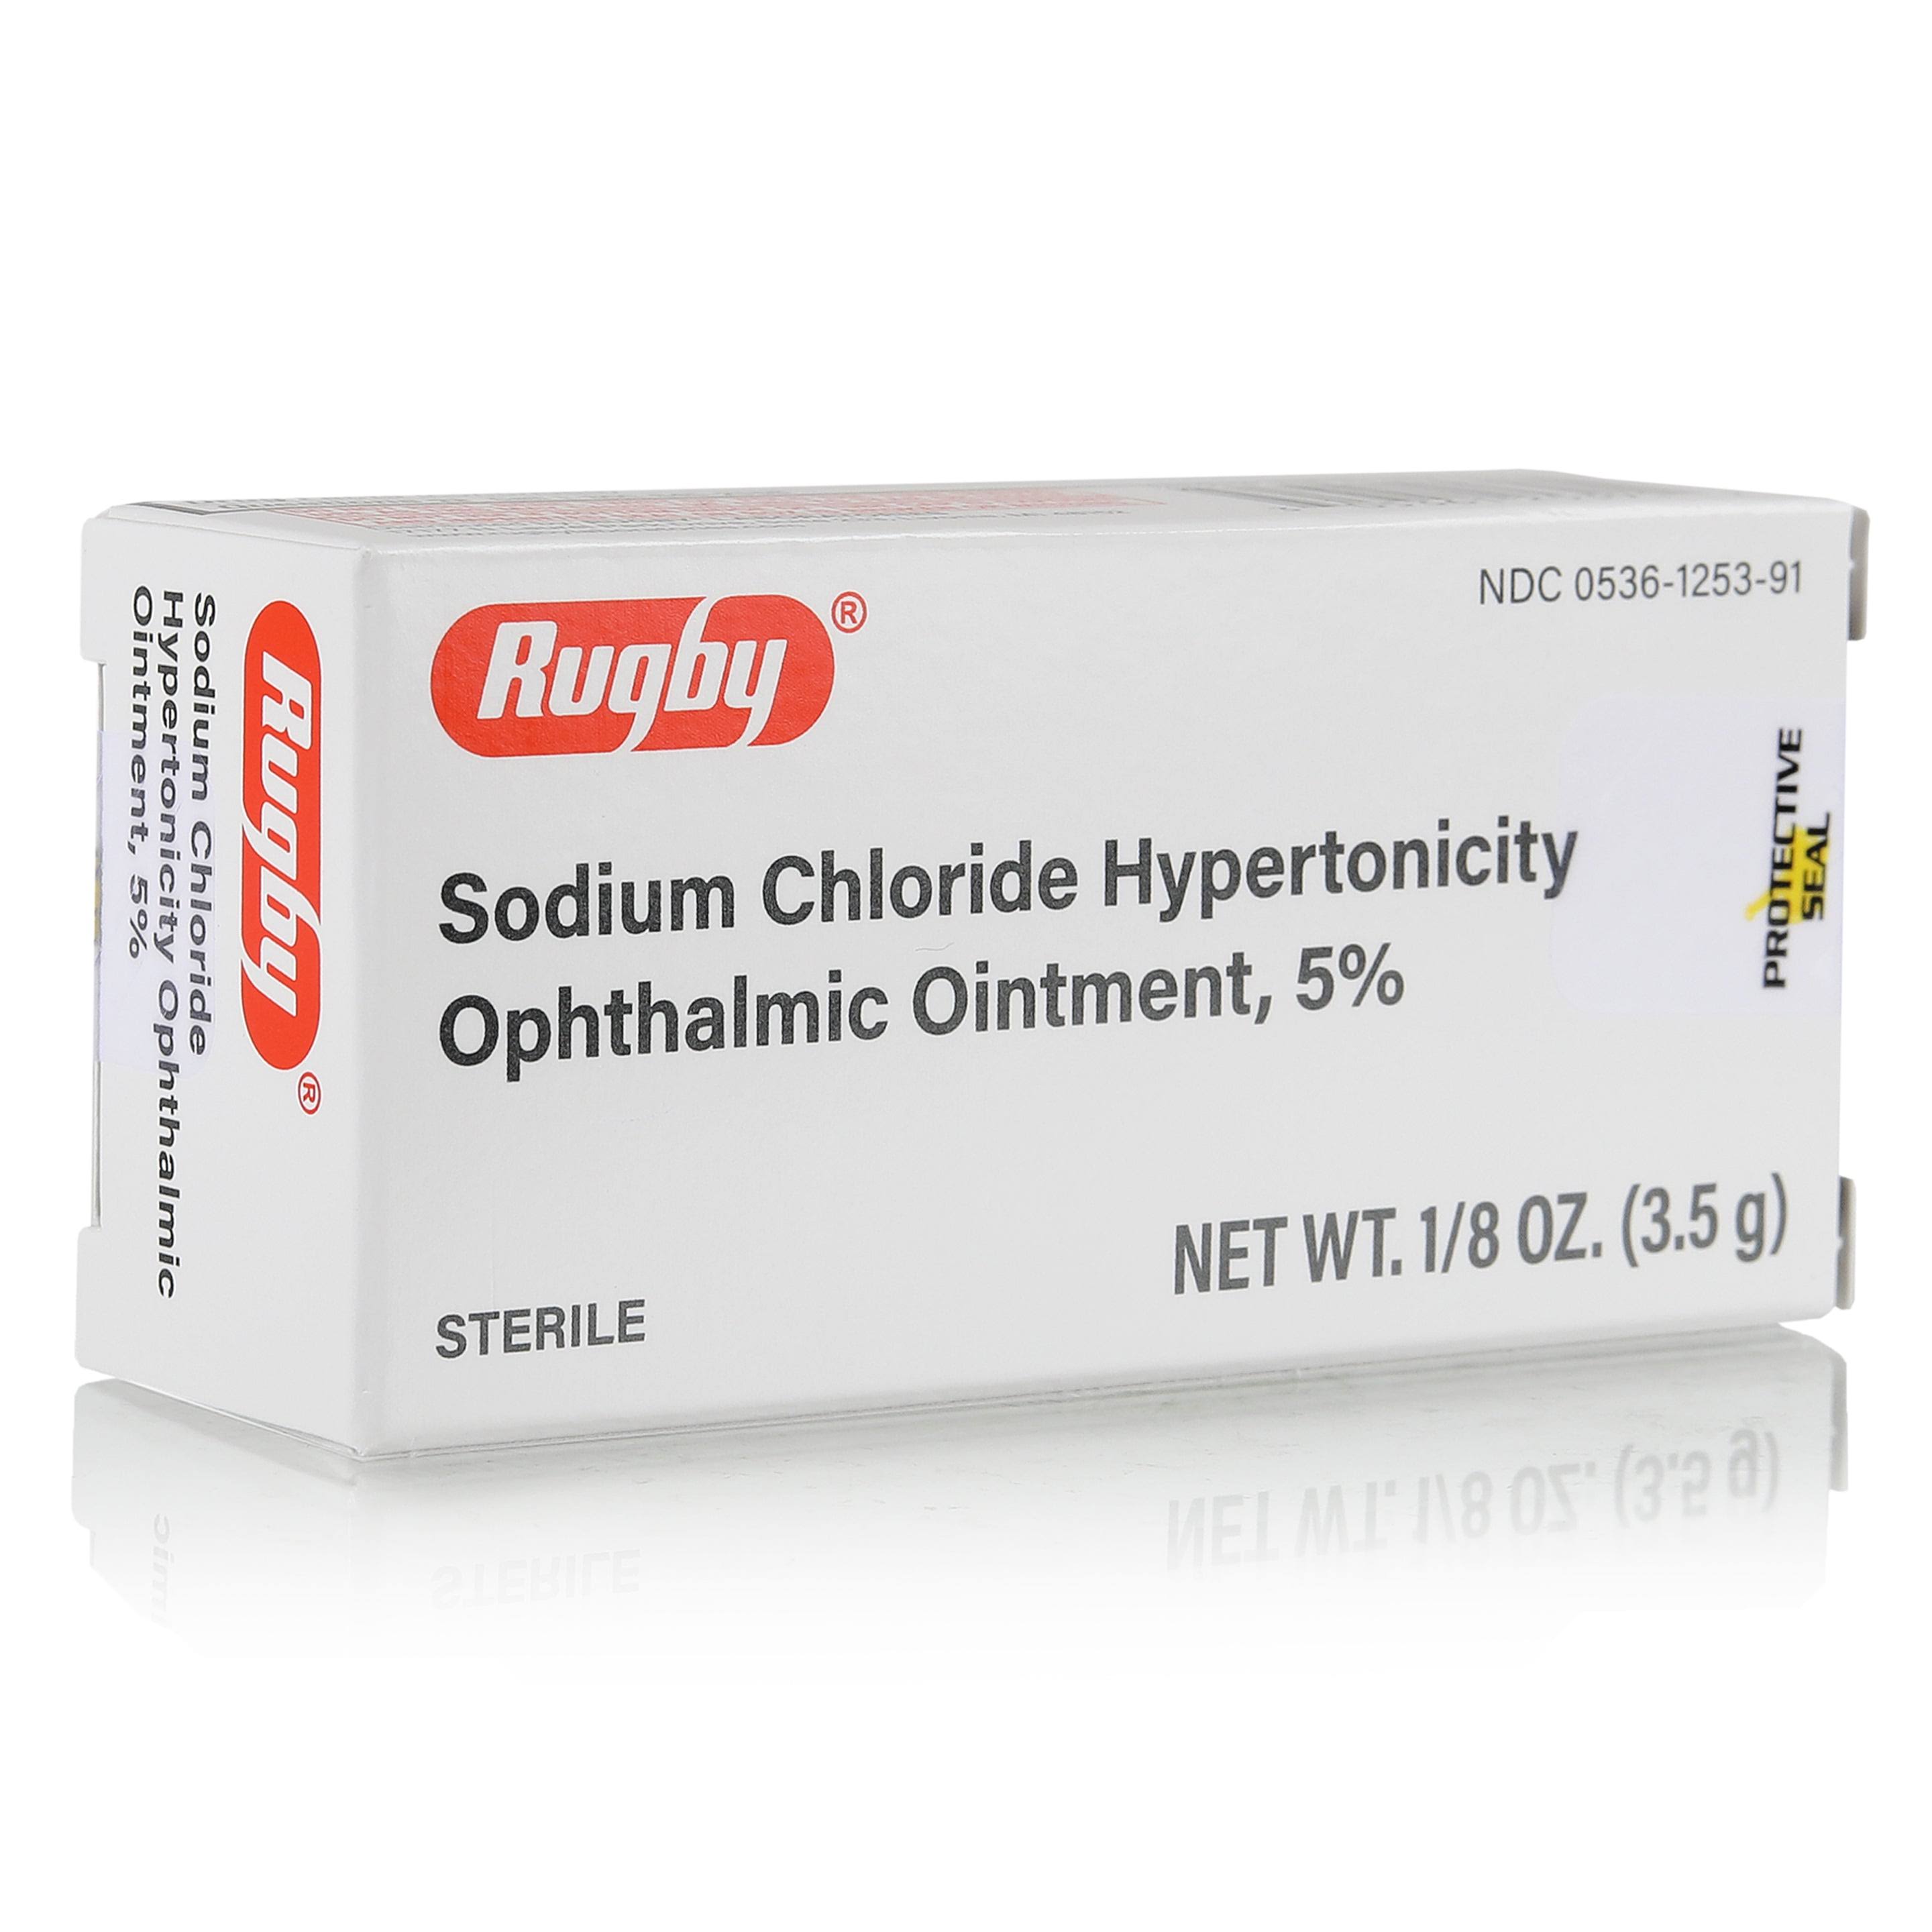 Rugby Sodium Chloride Hypertonicity Ophthalmic Ointment, 5% 1/8 oz